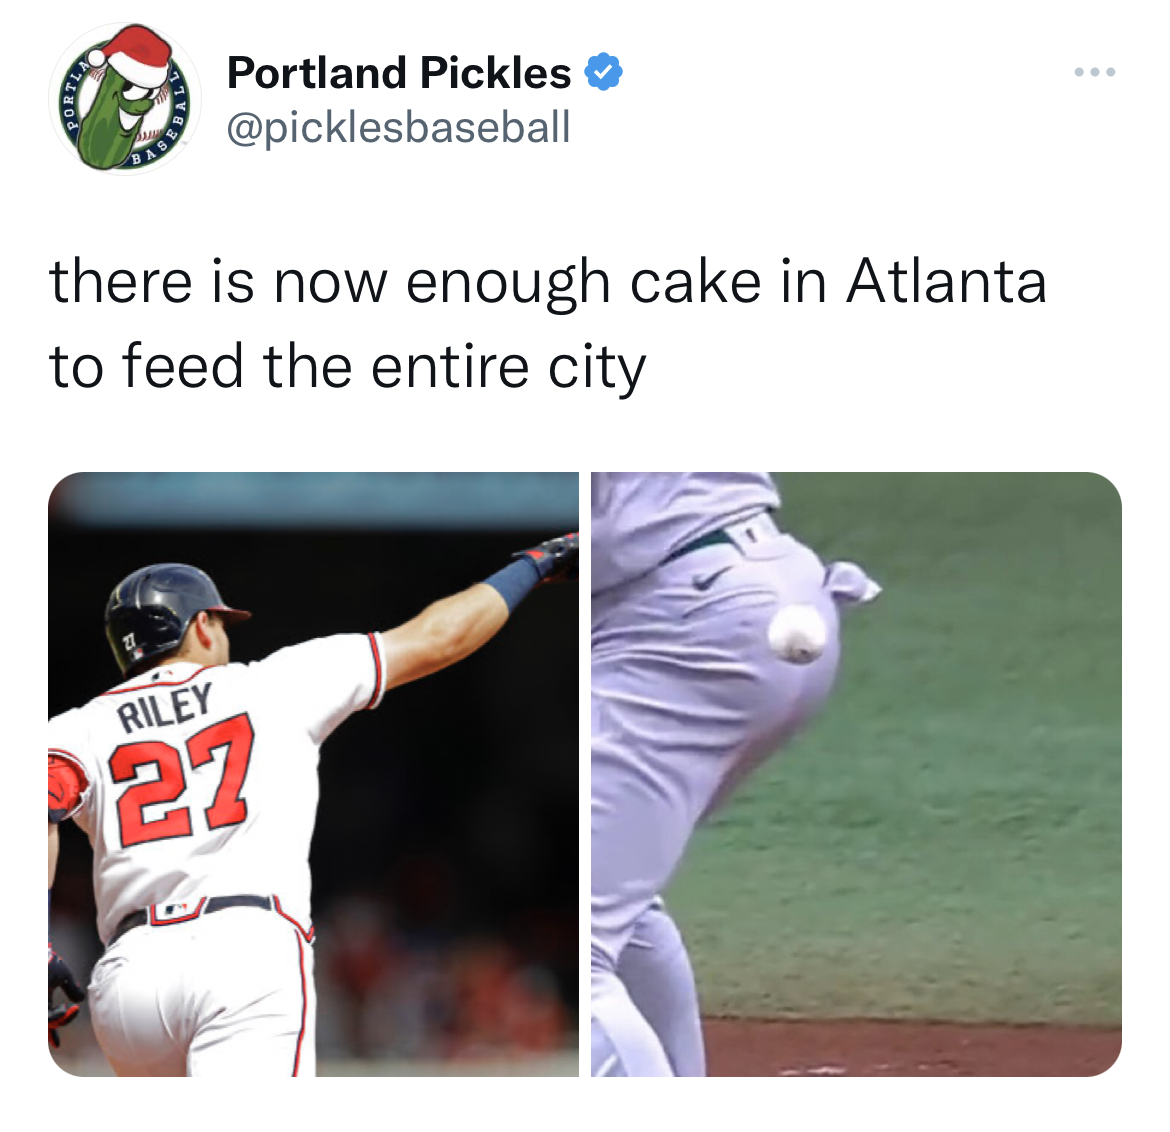 Tweets roasting celebs - baseball player - Portland Pickles there is now enough cake in Atlanta to feed the entire city Riley 27